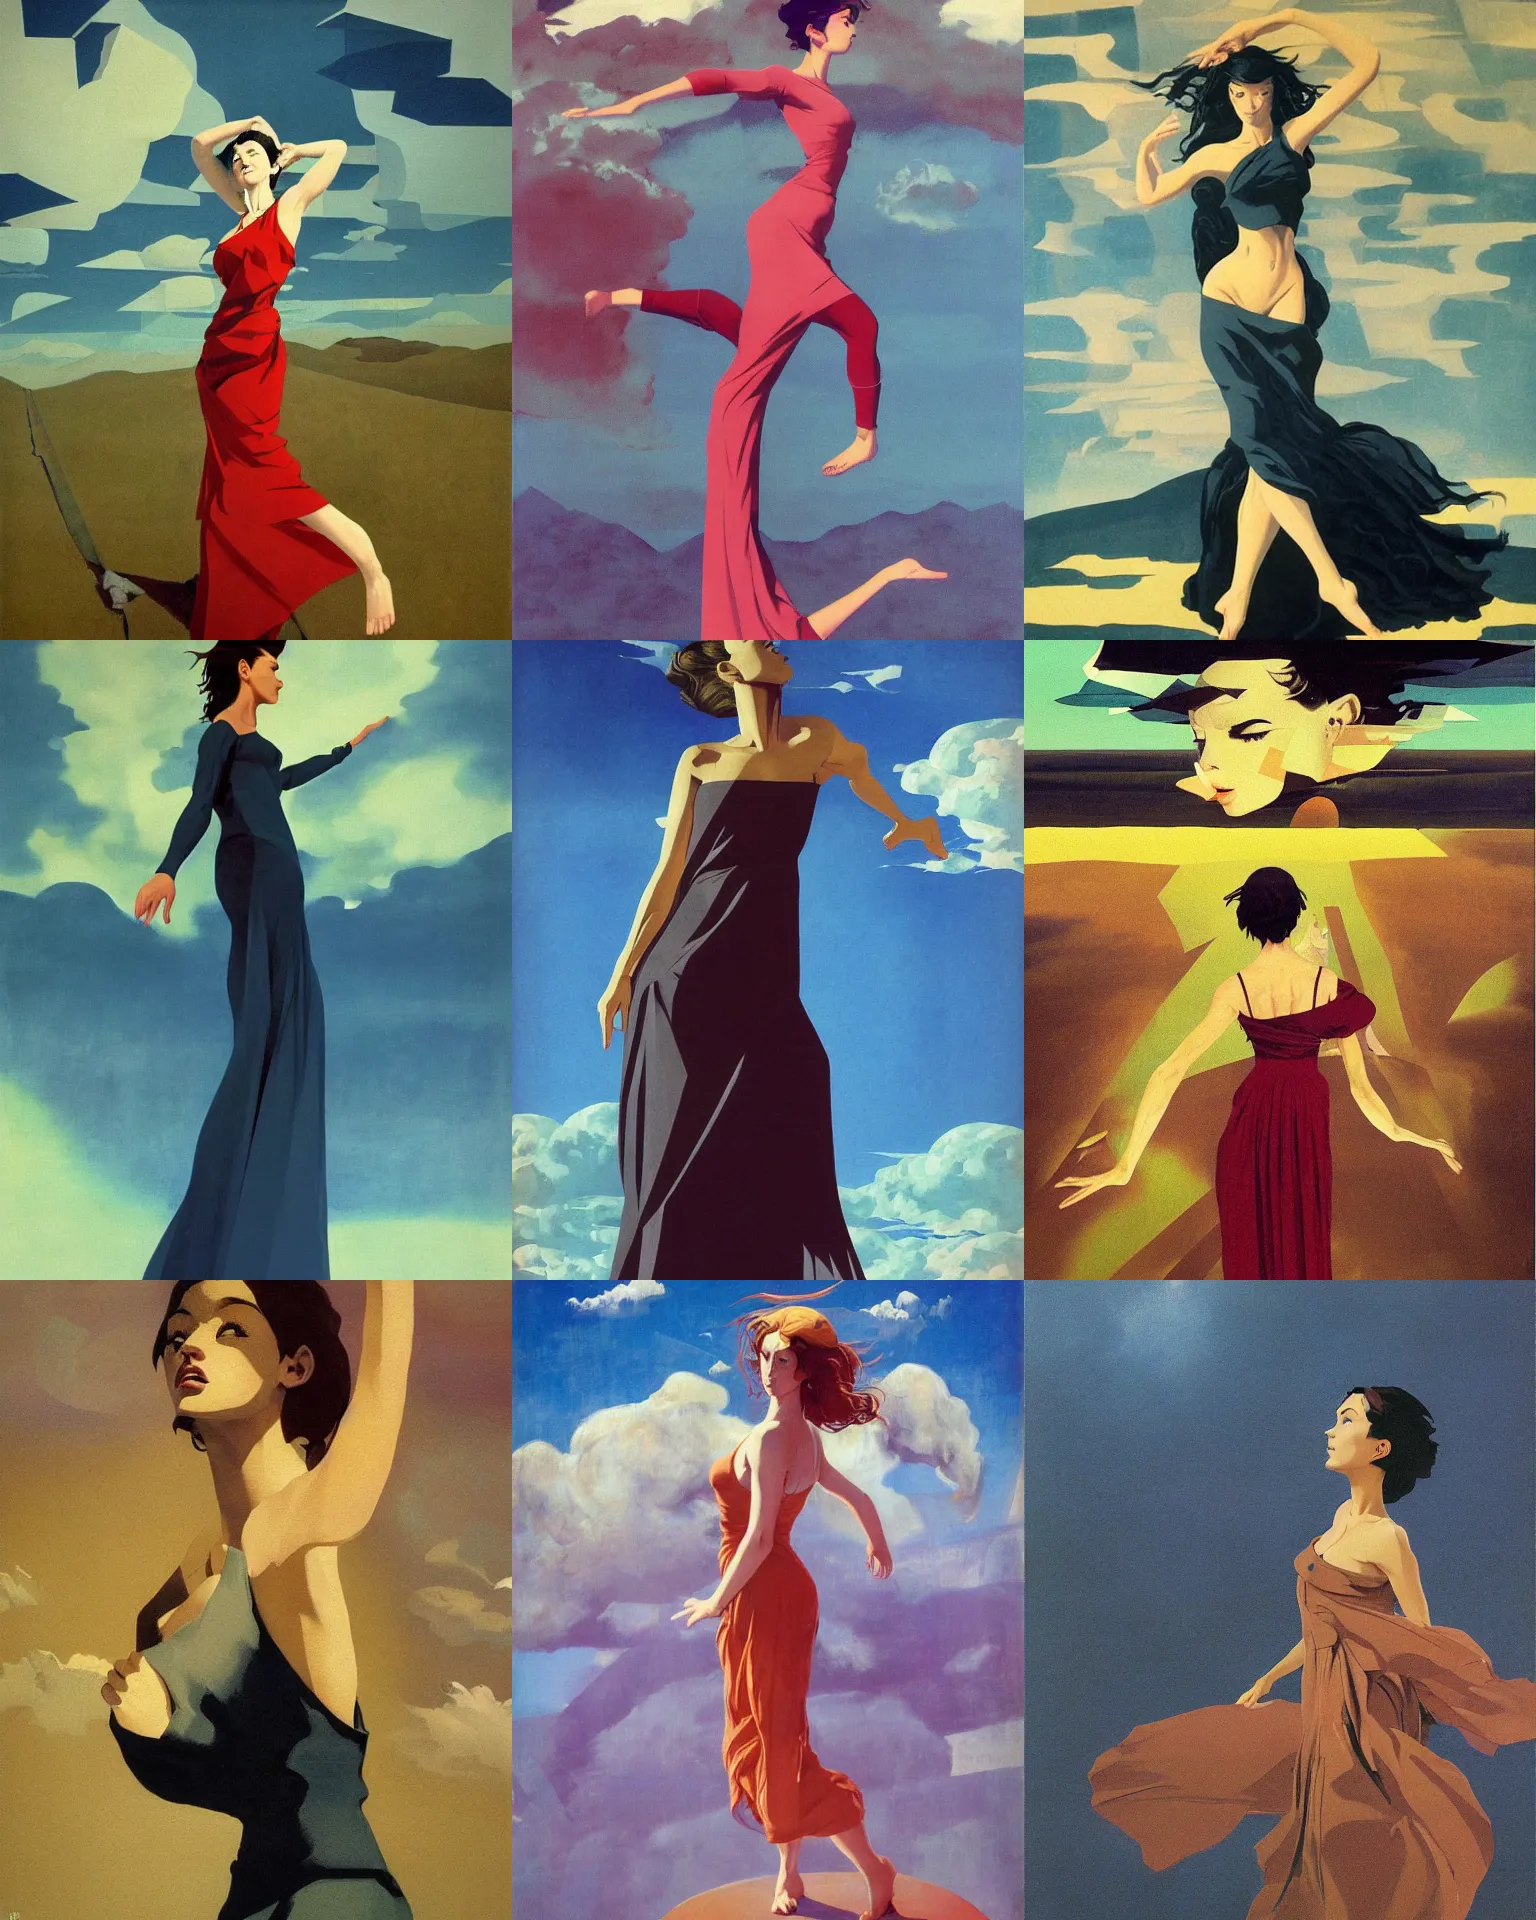 Prompt: woman portrait, female figure in maxi dress, sky, thunder clouds modernism, dynamic pose, dance, morning dramatic cinematic light, low poly, low poly, low poly, industrial, soviet painting, social realism, barocco, Frank Frazetta, Dean Ellis, Detmold Charles Maurice, gustav klimt, levitation, movie poster 1993 anime